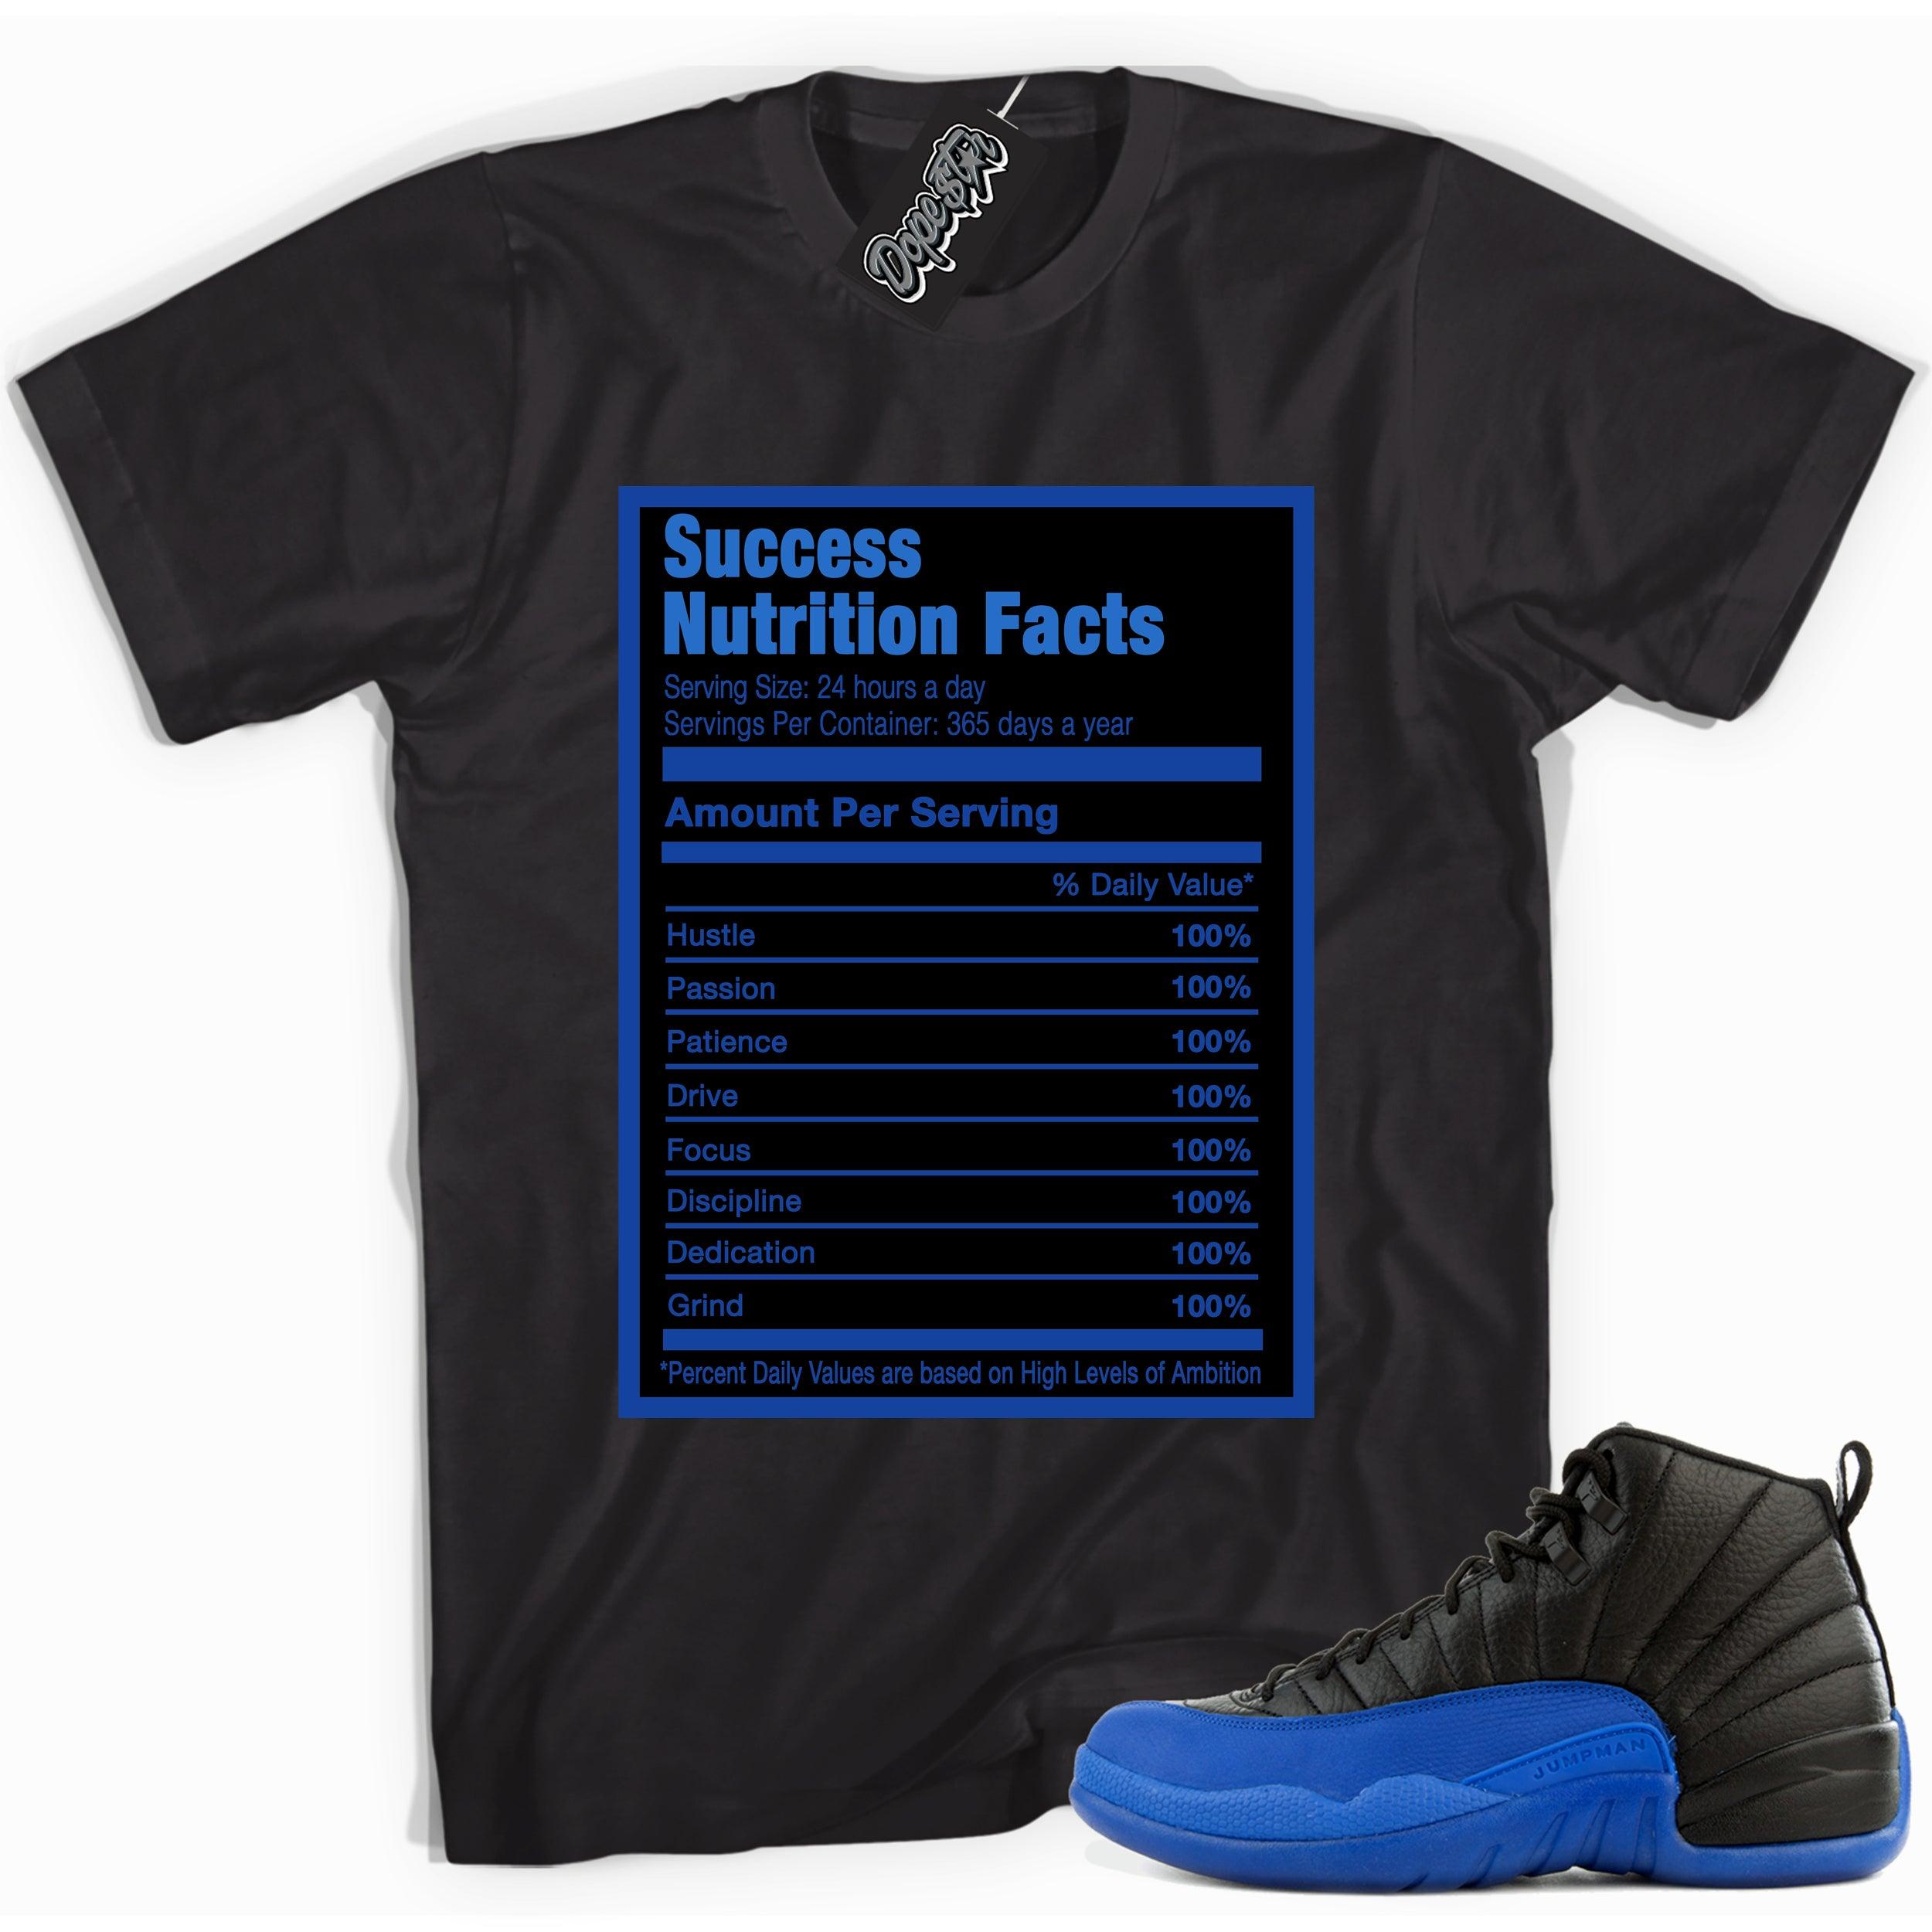 Cool black graphic tee with 'success nutrition facts' print, that perfectly matches  Air Jordan 12 Retro Black Game Royal sneakers.